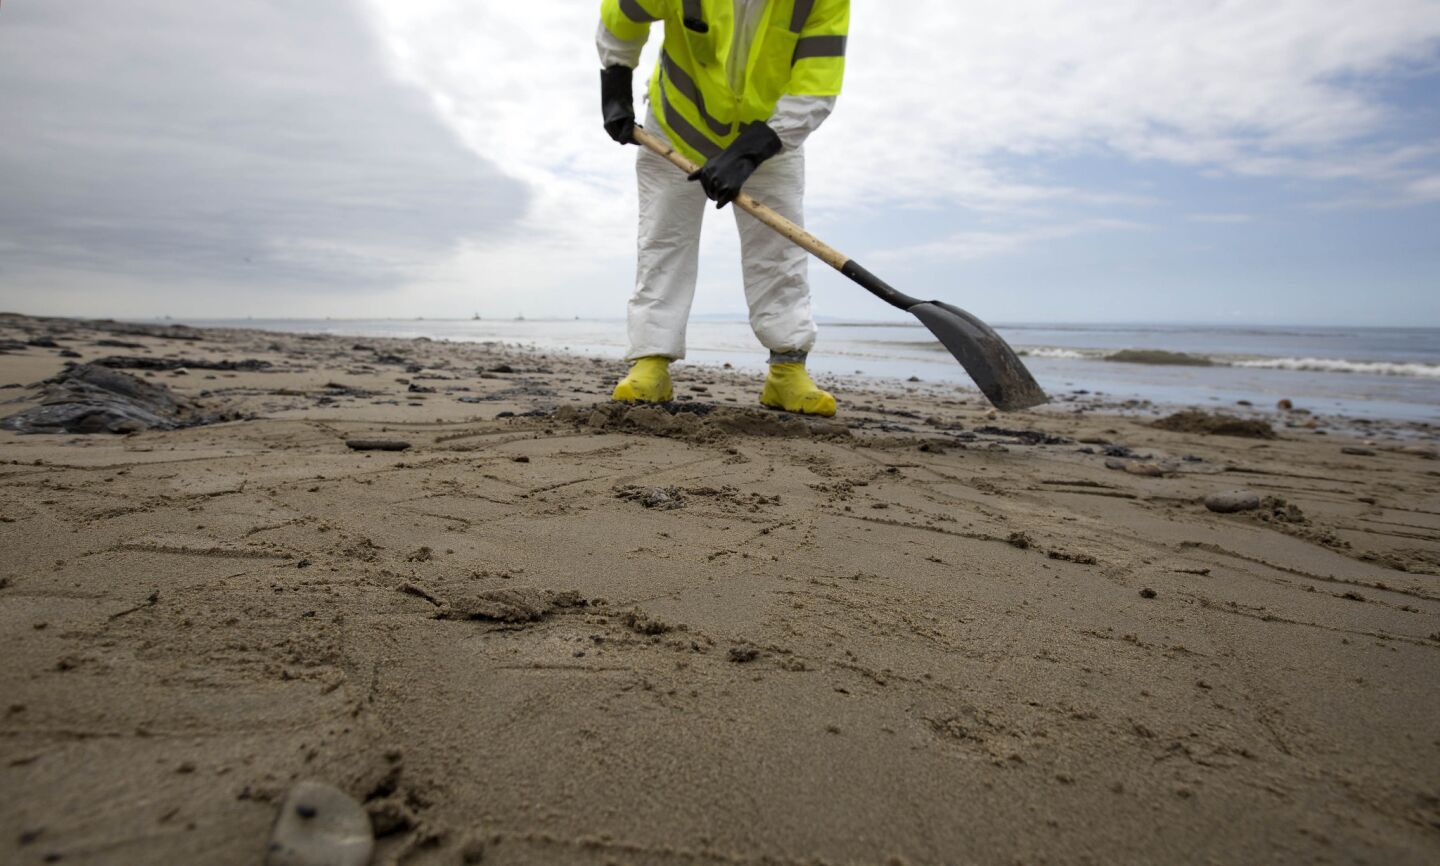 Patriot Environmental Services employee scrapes up oil-contaminated sand into small piles for removal on the shoreline at Refugio State Beach.